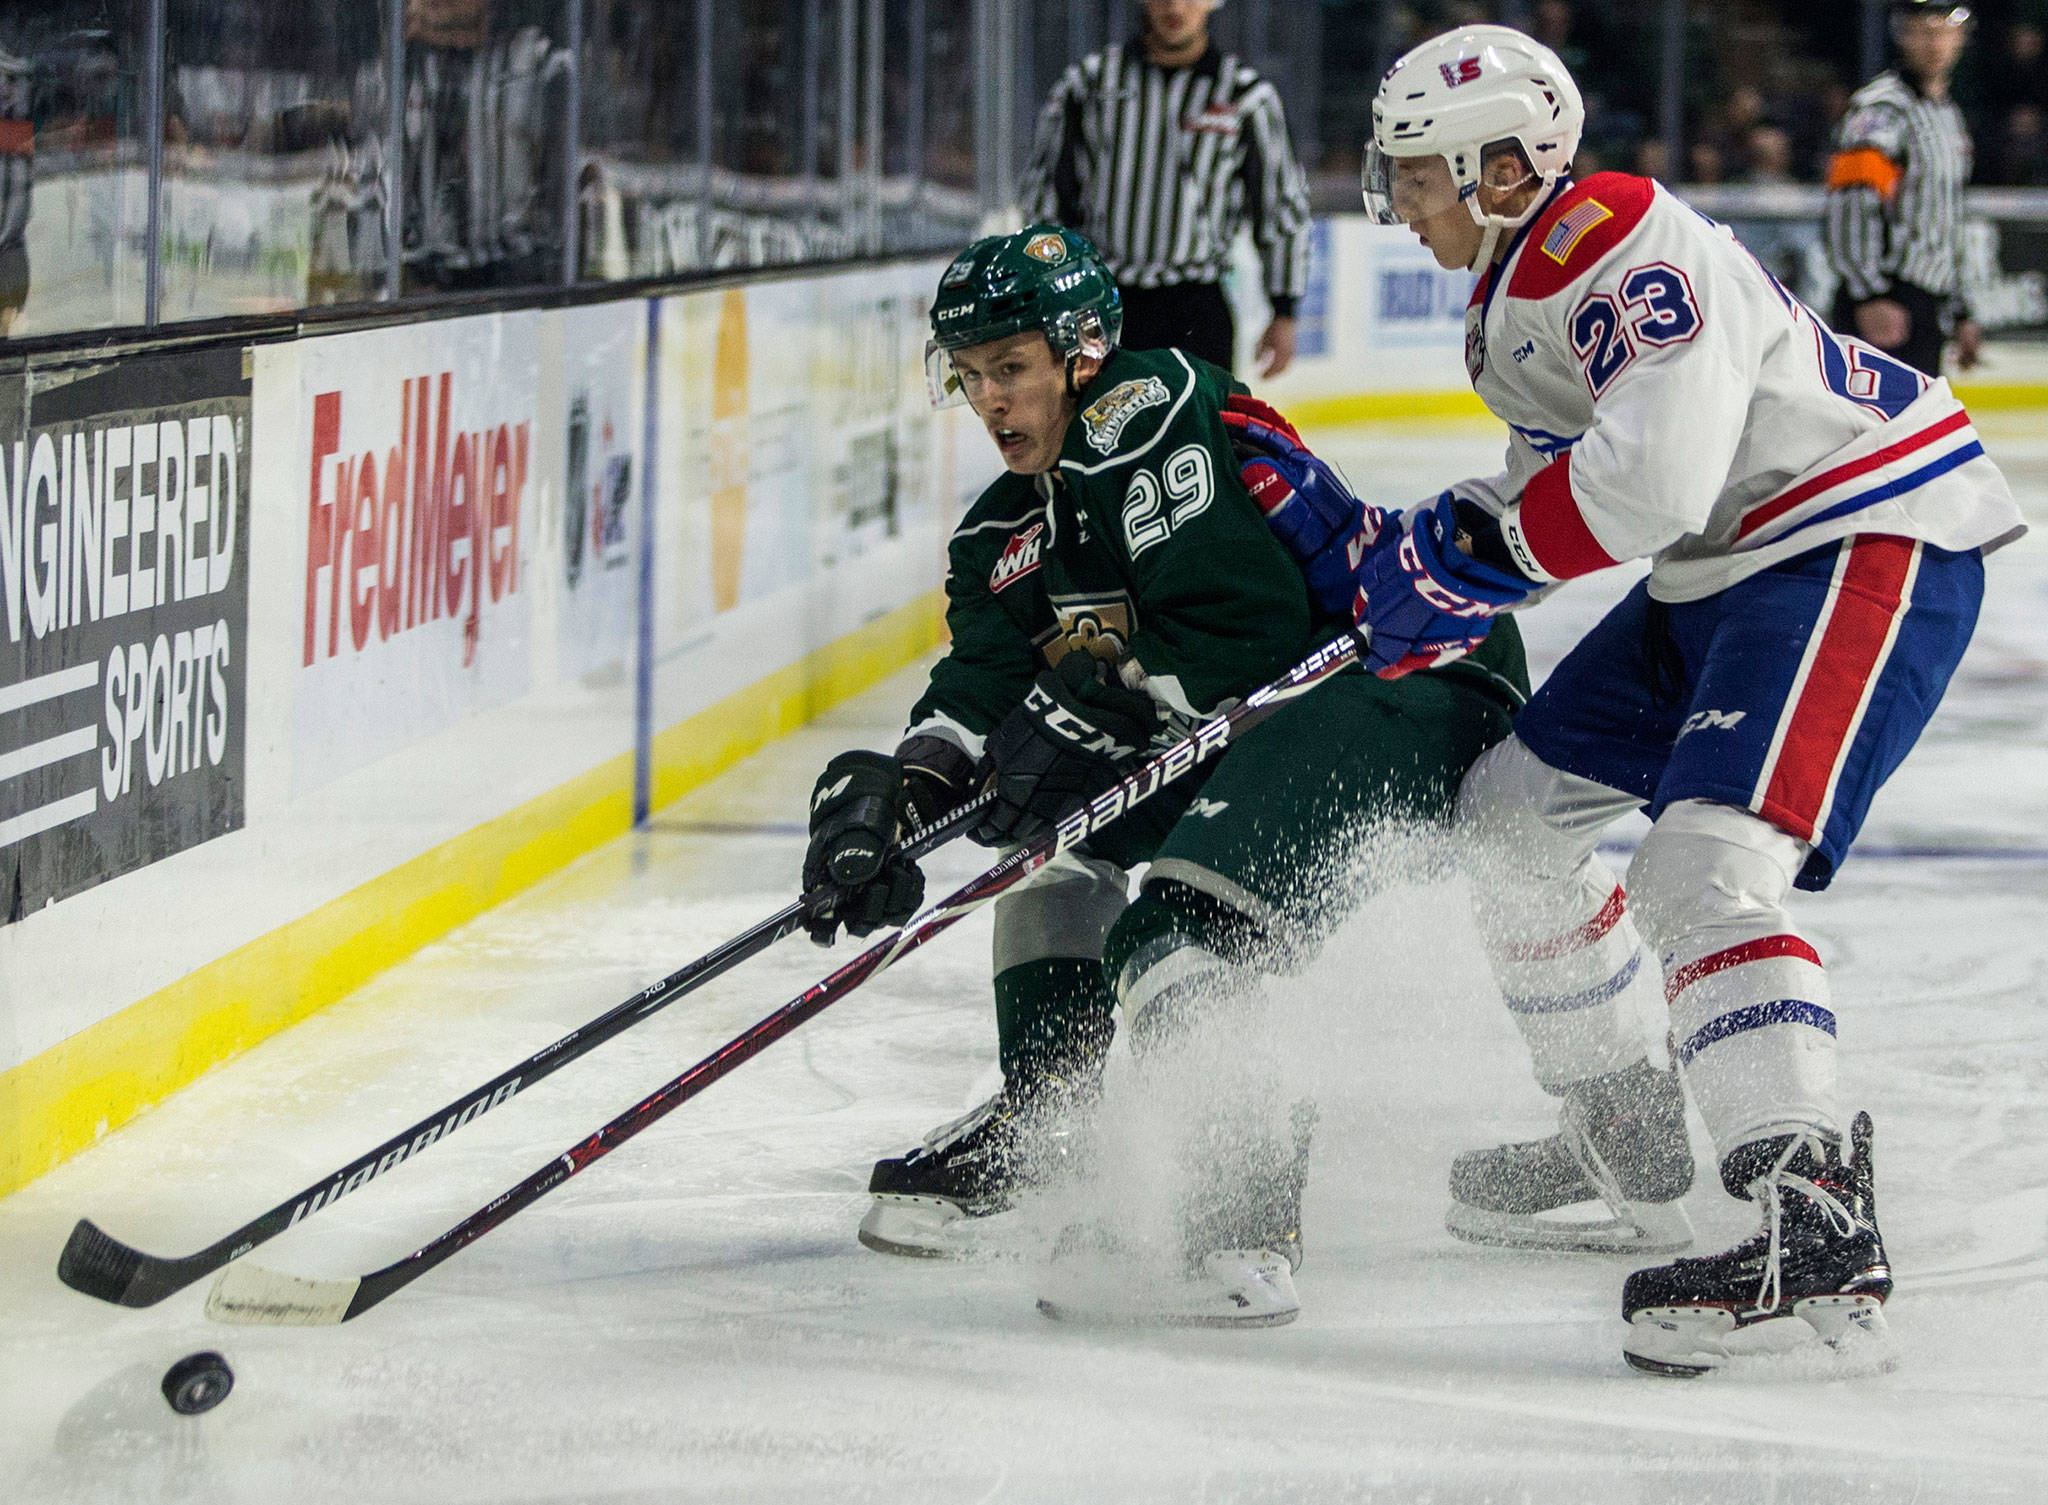 Silvertips’ Wyatte Wylie fights for the puck during the game against the Spokane Chiefs on Sunday in Everett. (Olivia Vanni / The Herald)